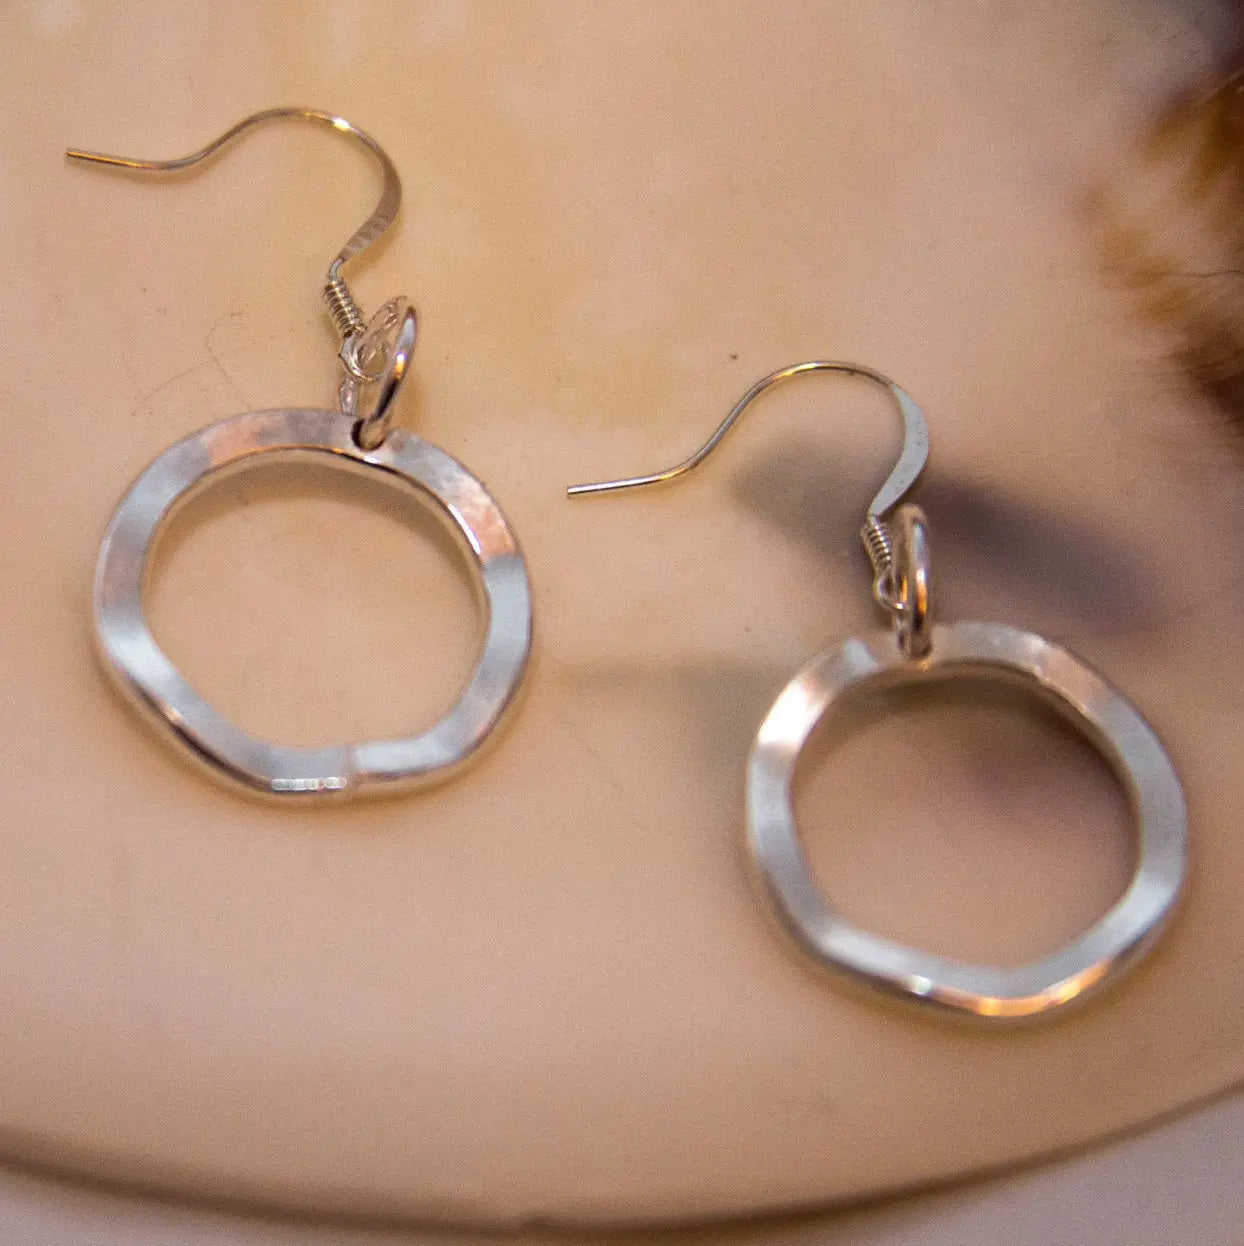 Silver Hoop Earrings – Silver Round Drop Earrings – Simple Silver Earrings – Modern Minimal Silver Earrings - EvieRuth Designs Jewelry